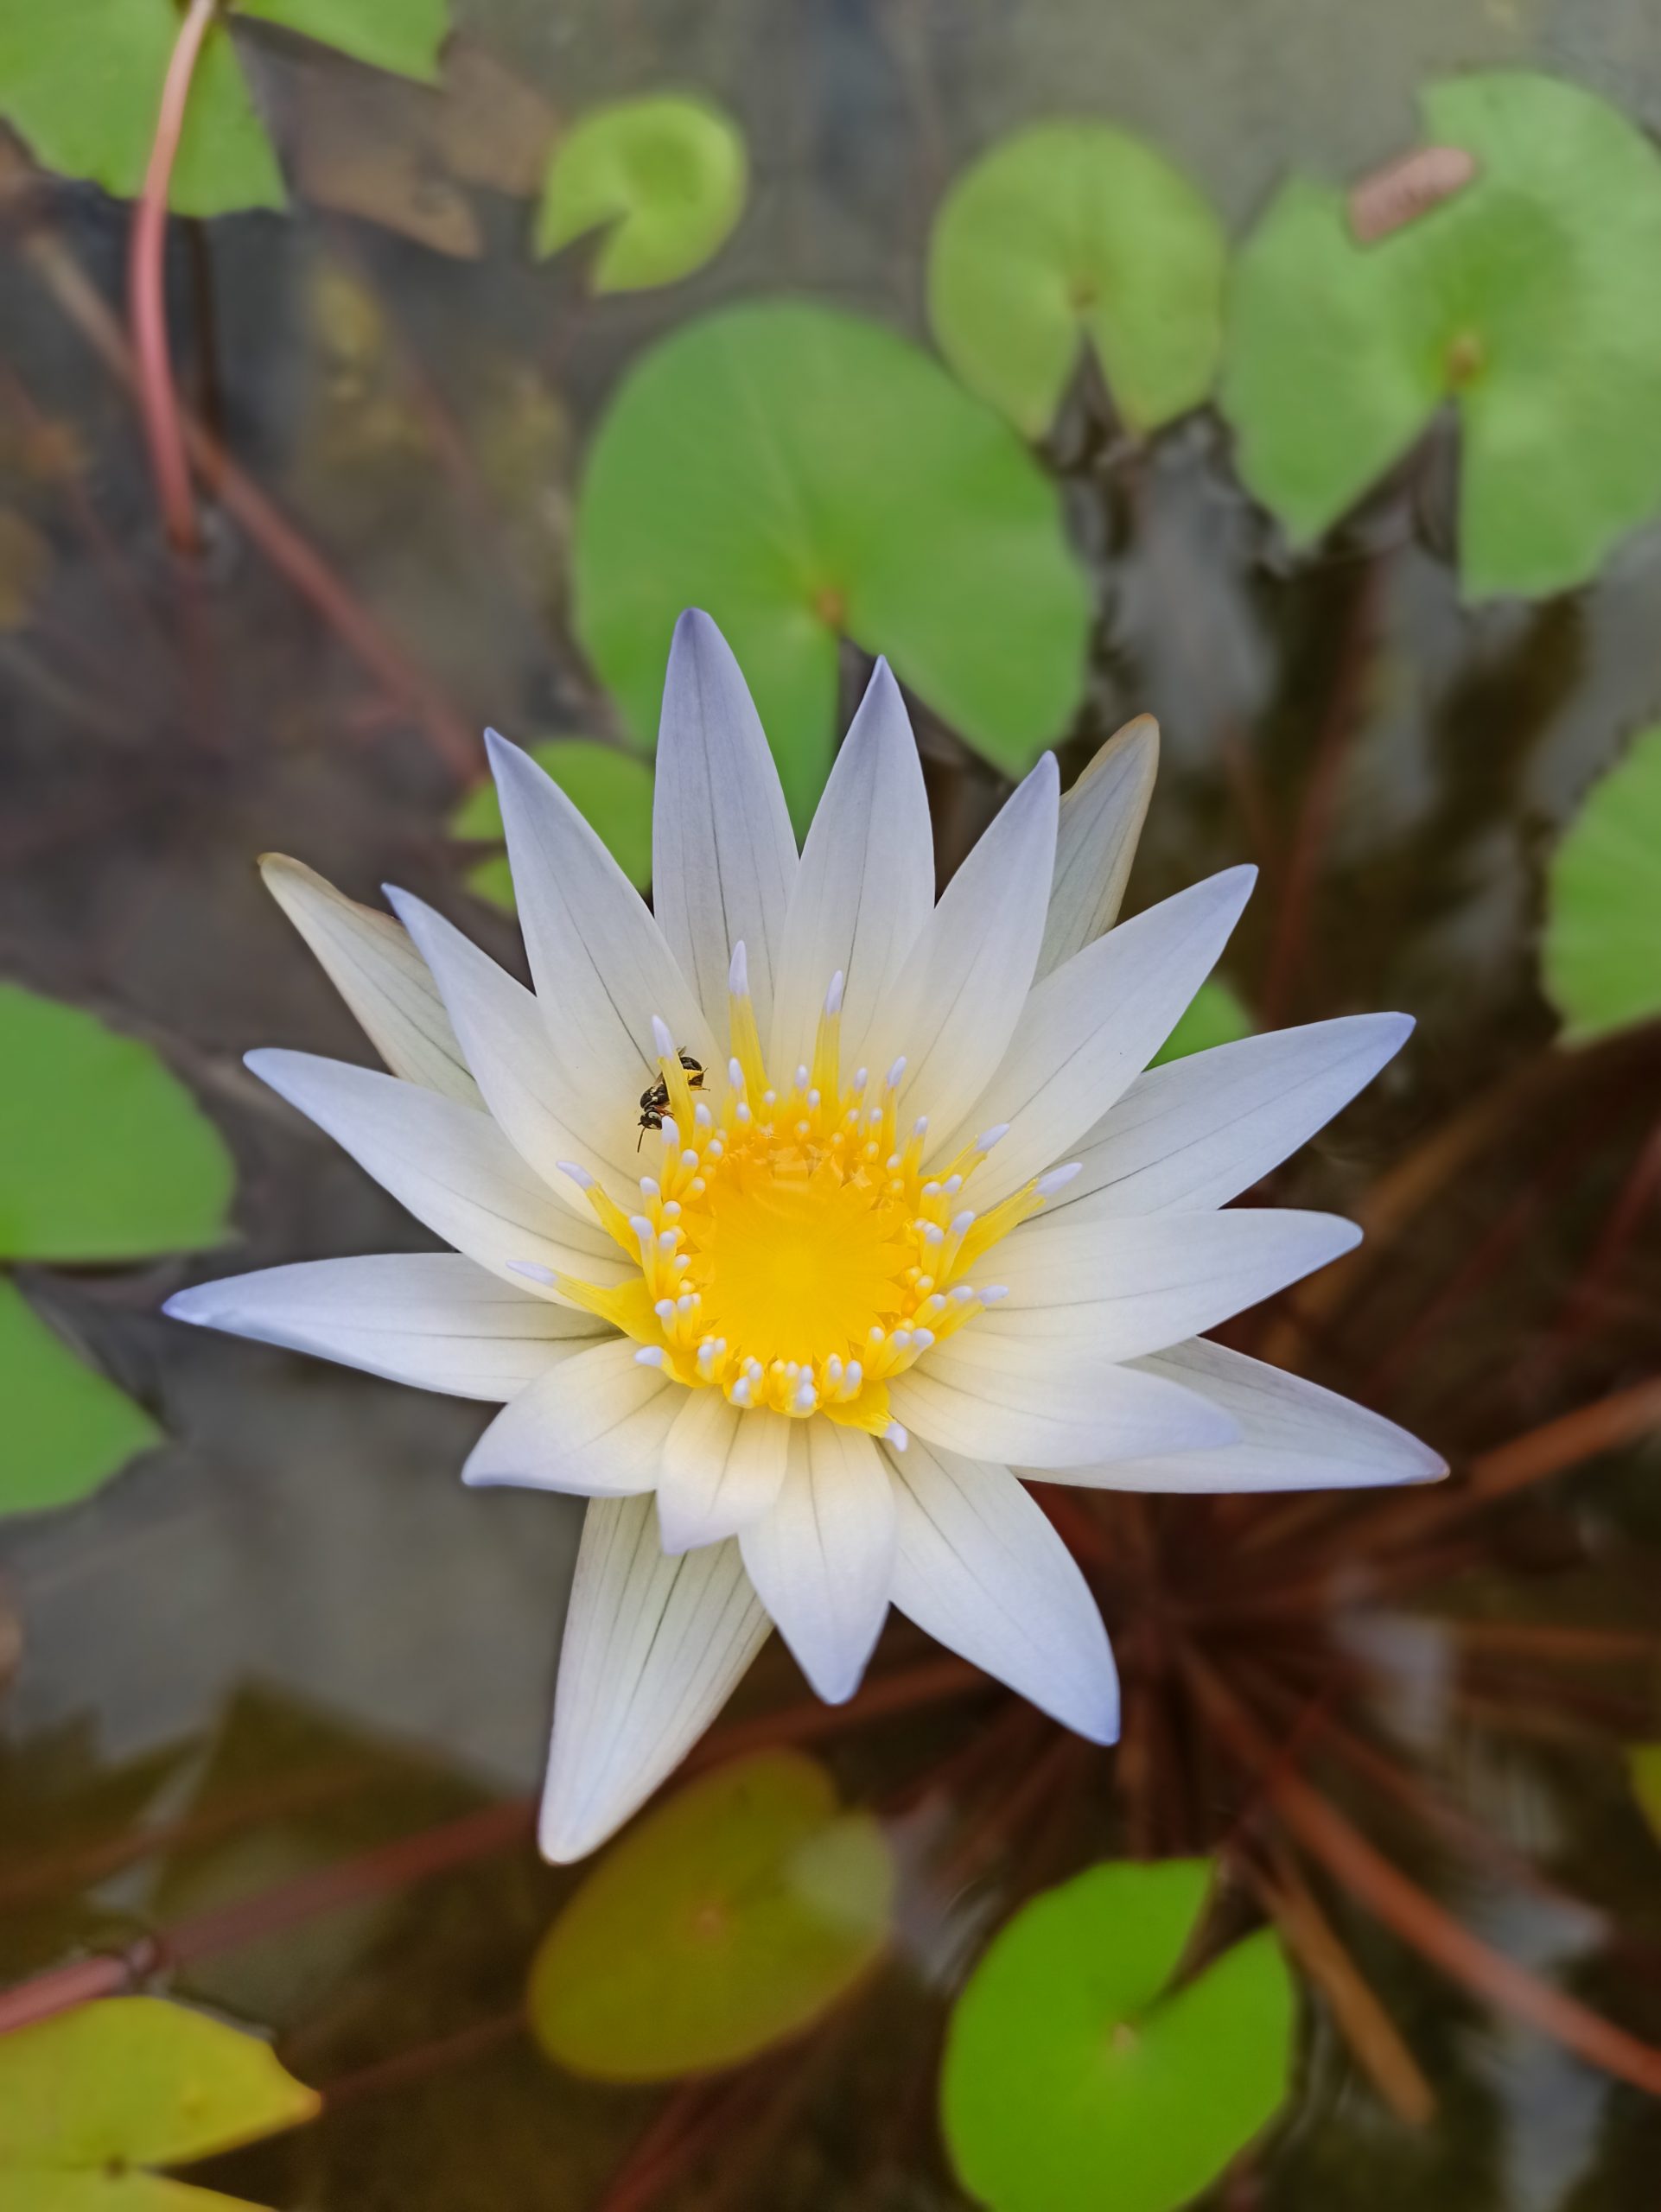 A water lily flower